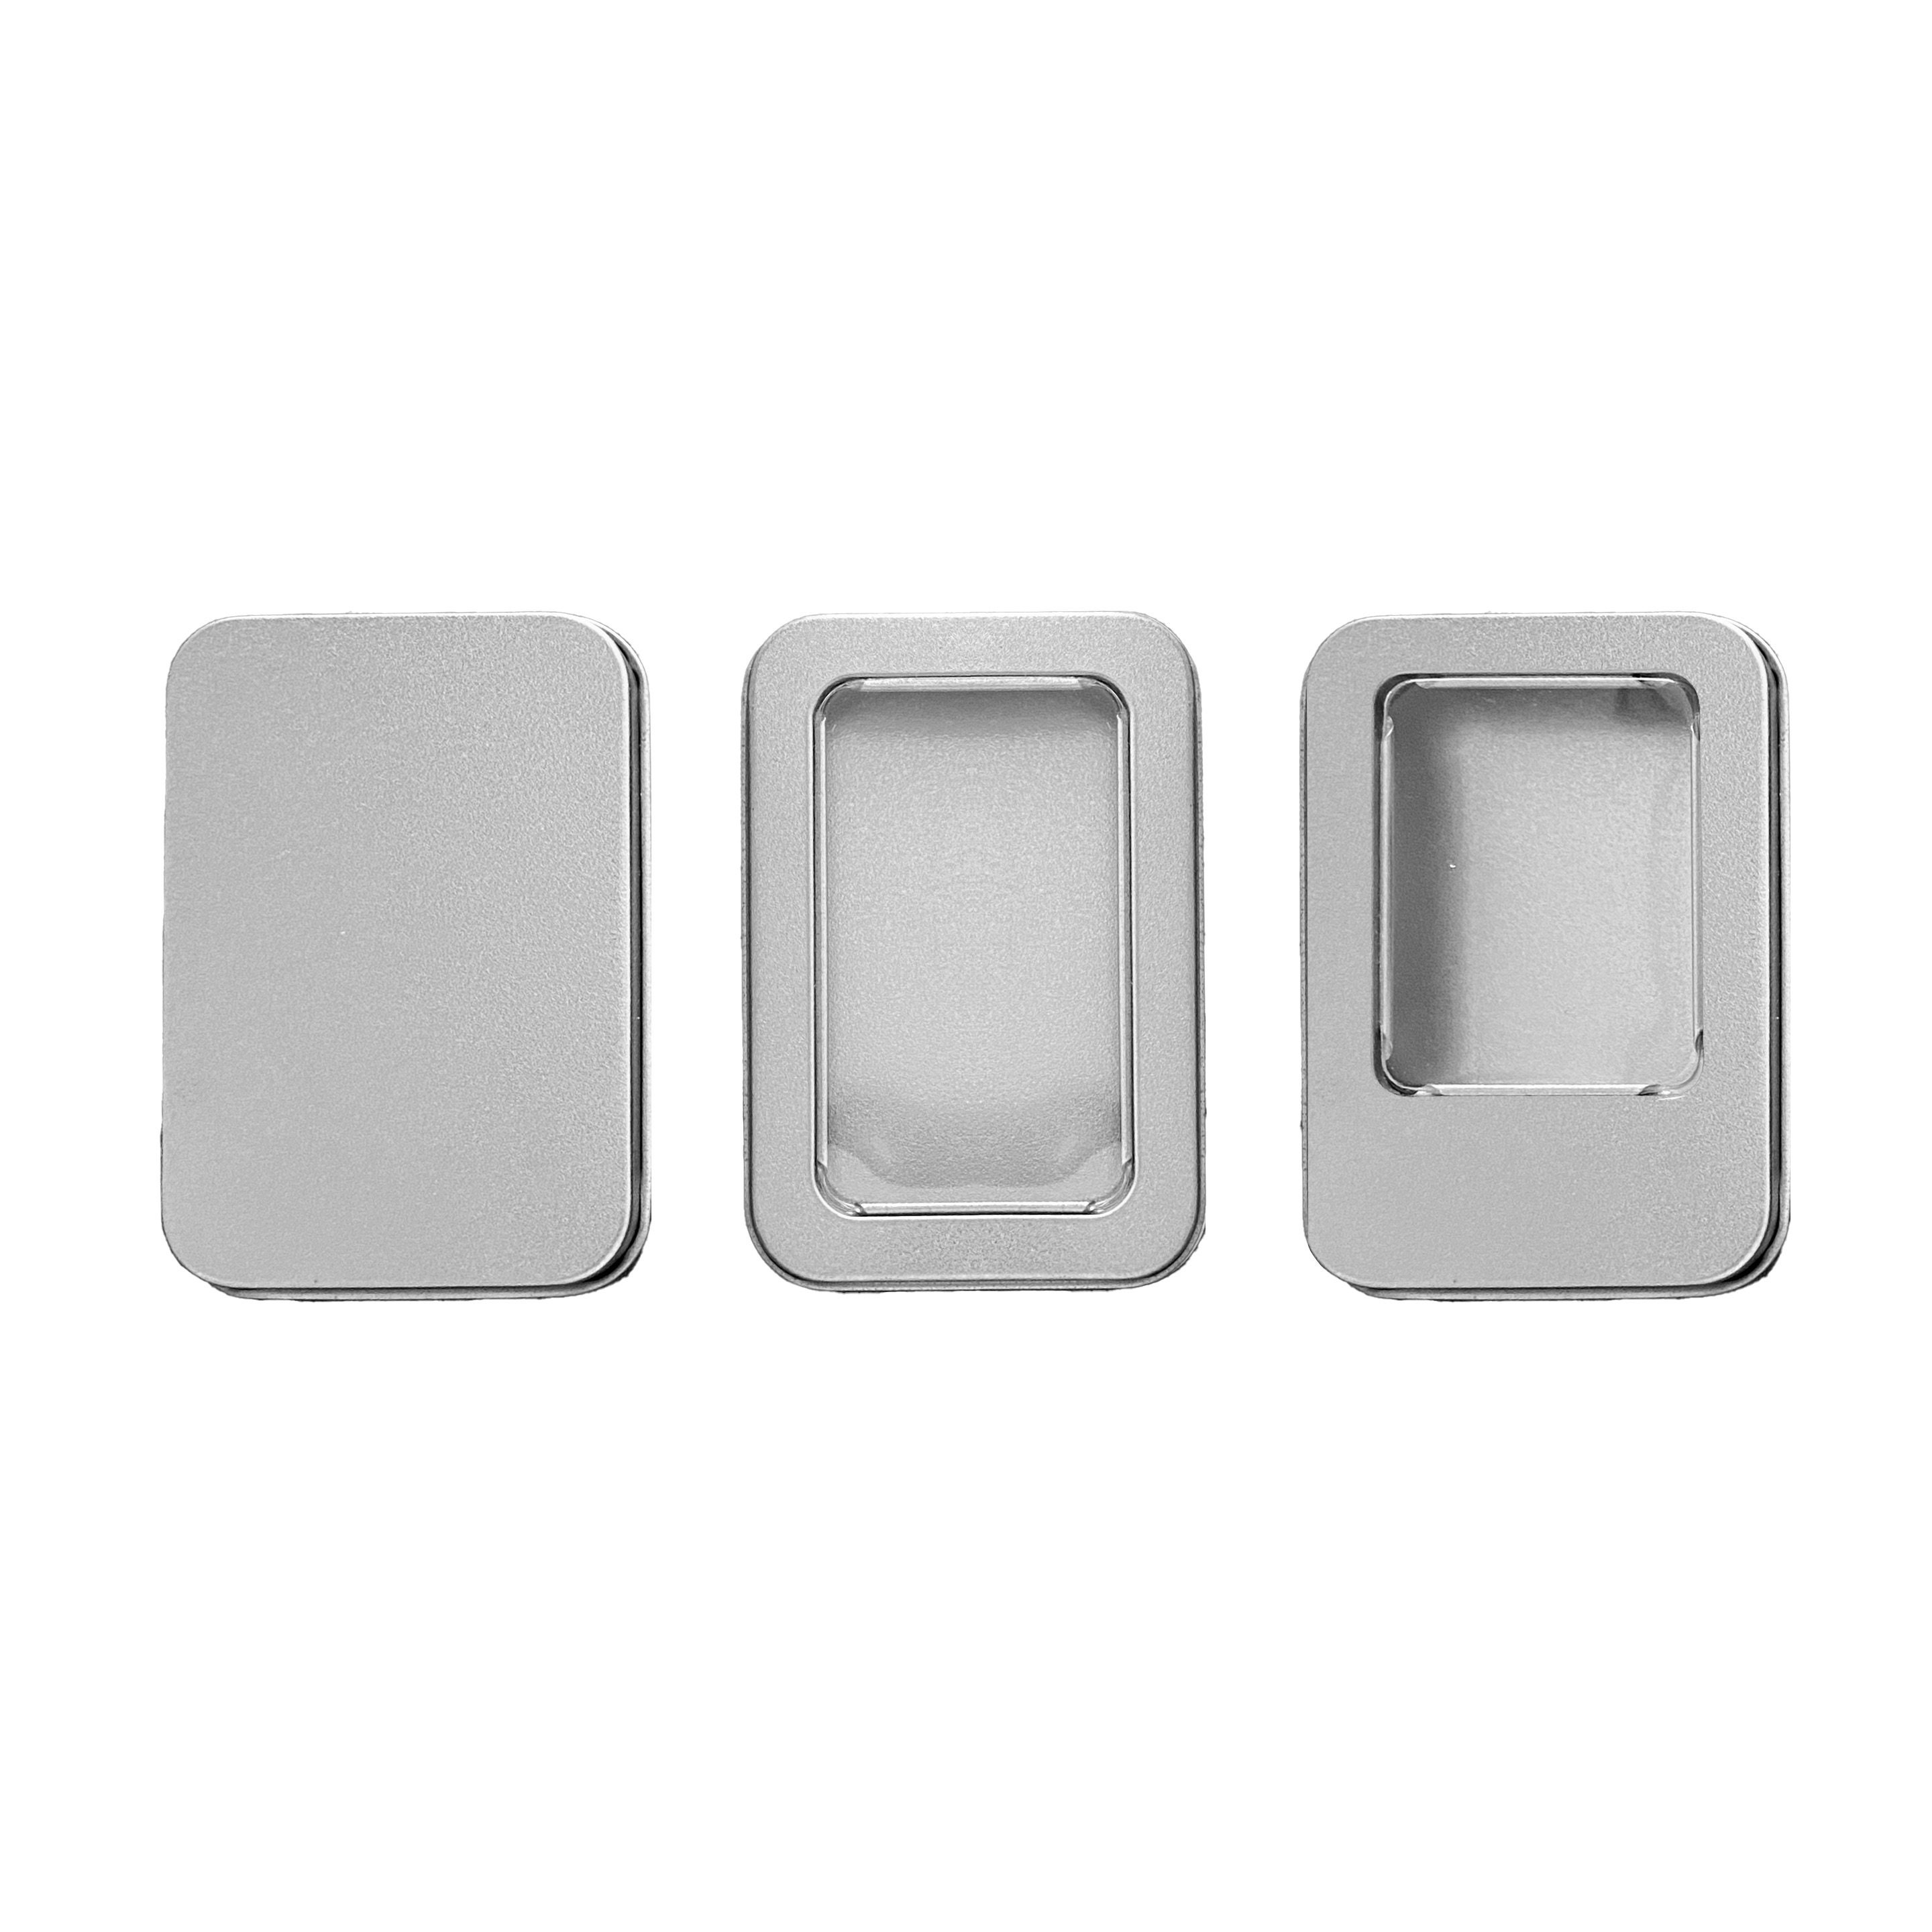 2 Silver Rectangular Metal Tins With Lids for Soap Candles Candies Cookie  Gifts Box Jewelry Watch Jewelry Packaging Boxes Organizer Case 